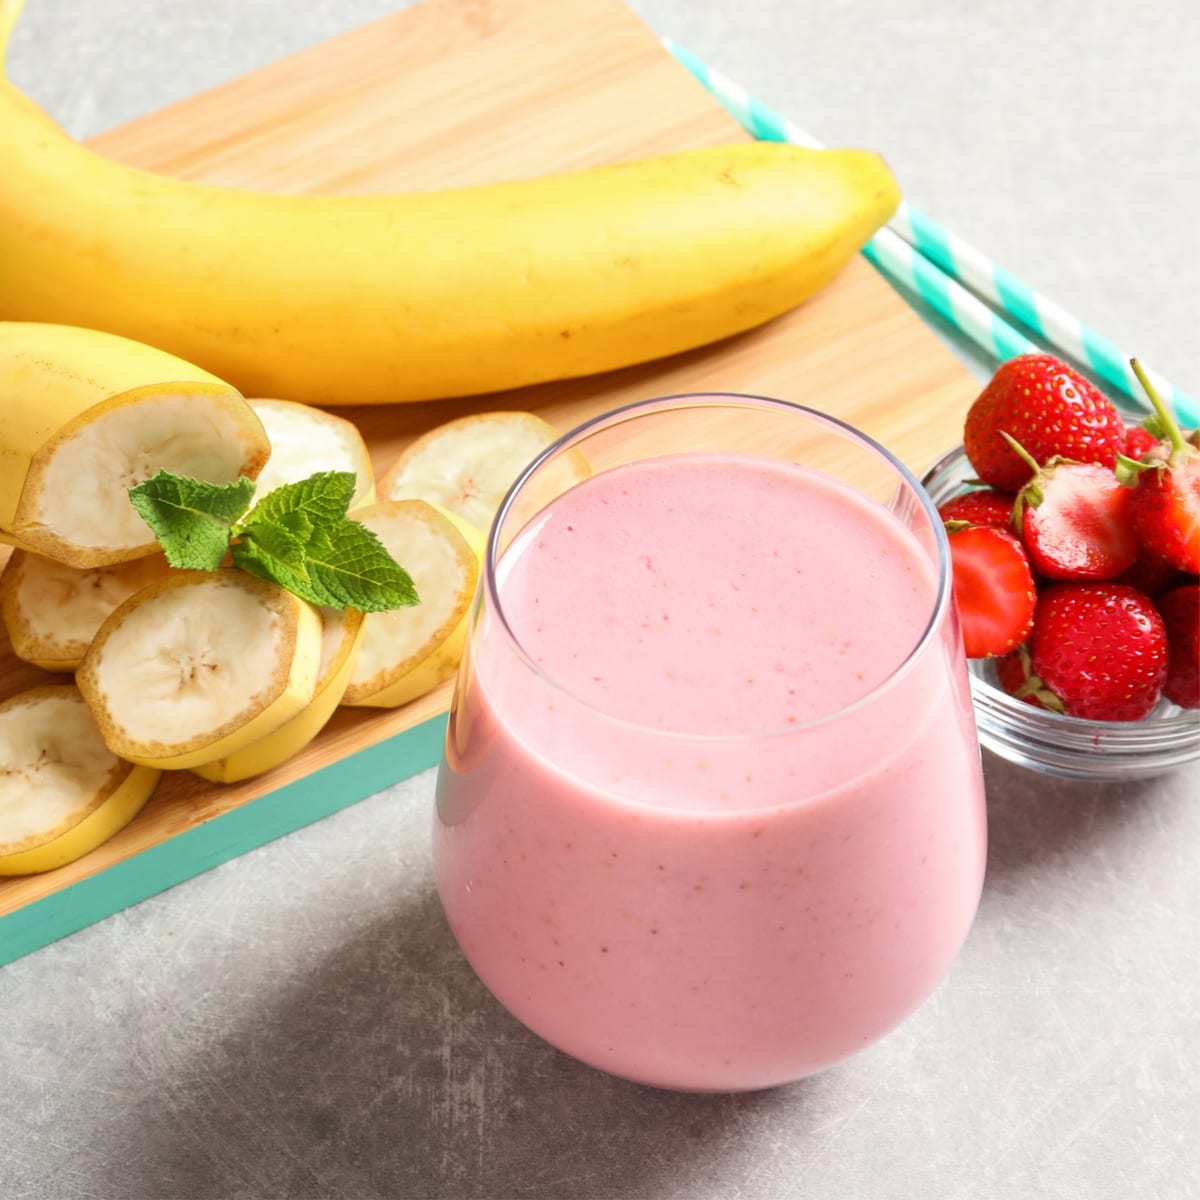 A Glass of Strawberry Smoothie with Sliced Berries and Bananas in the Background